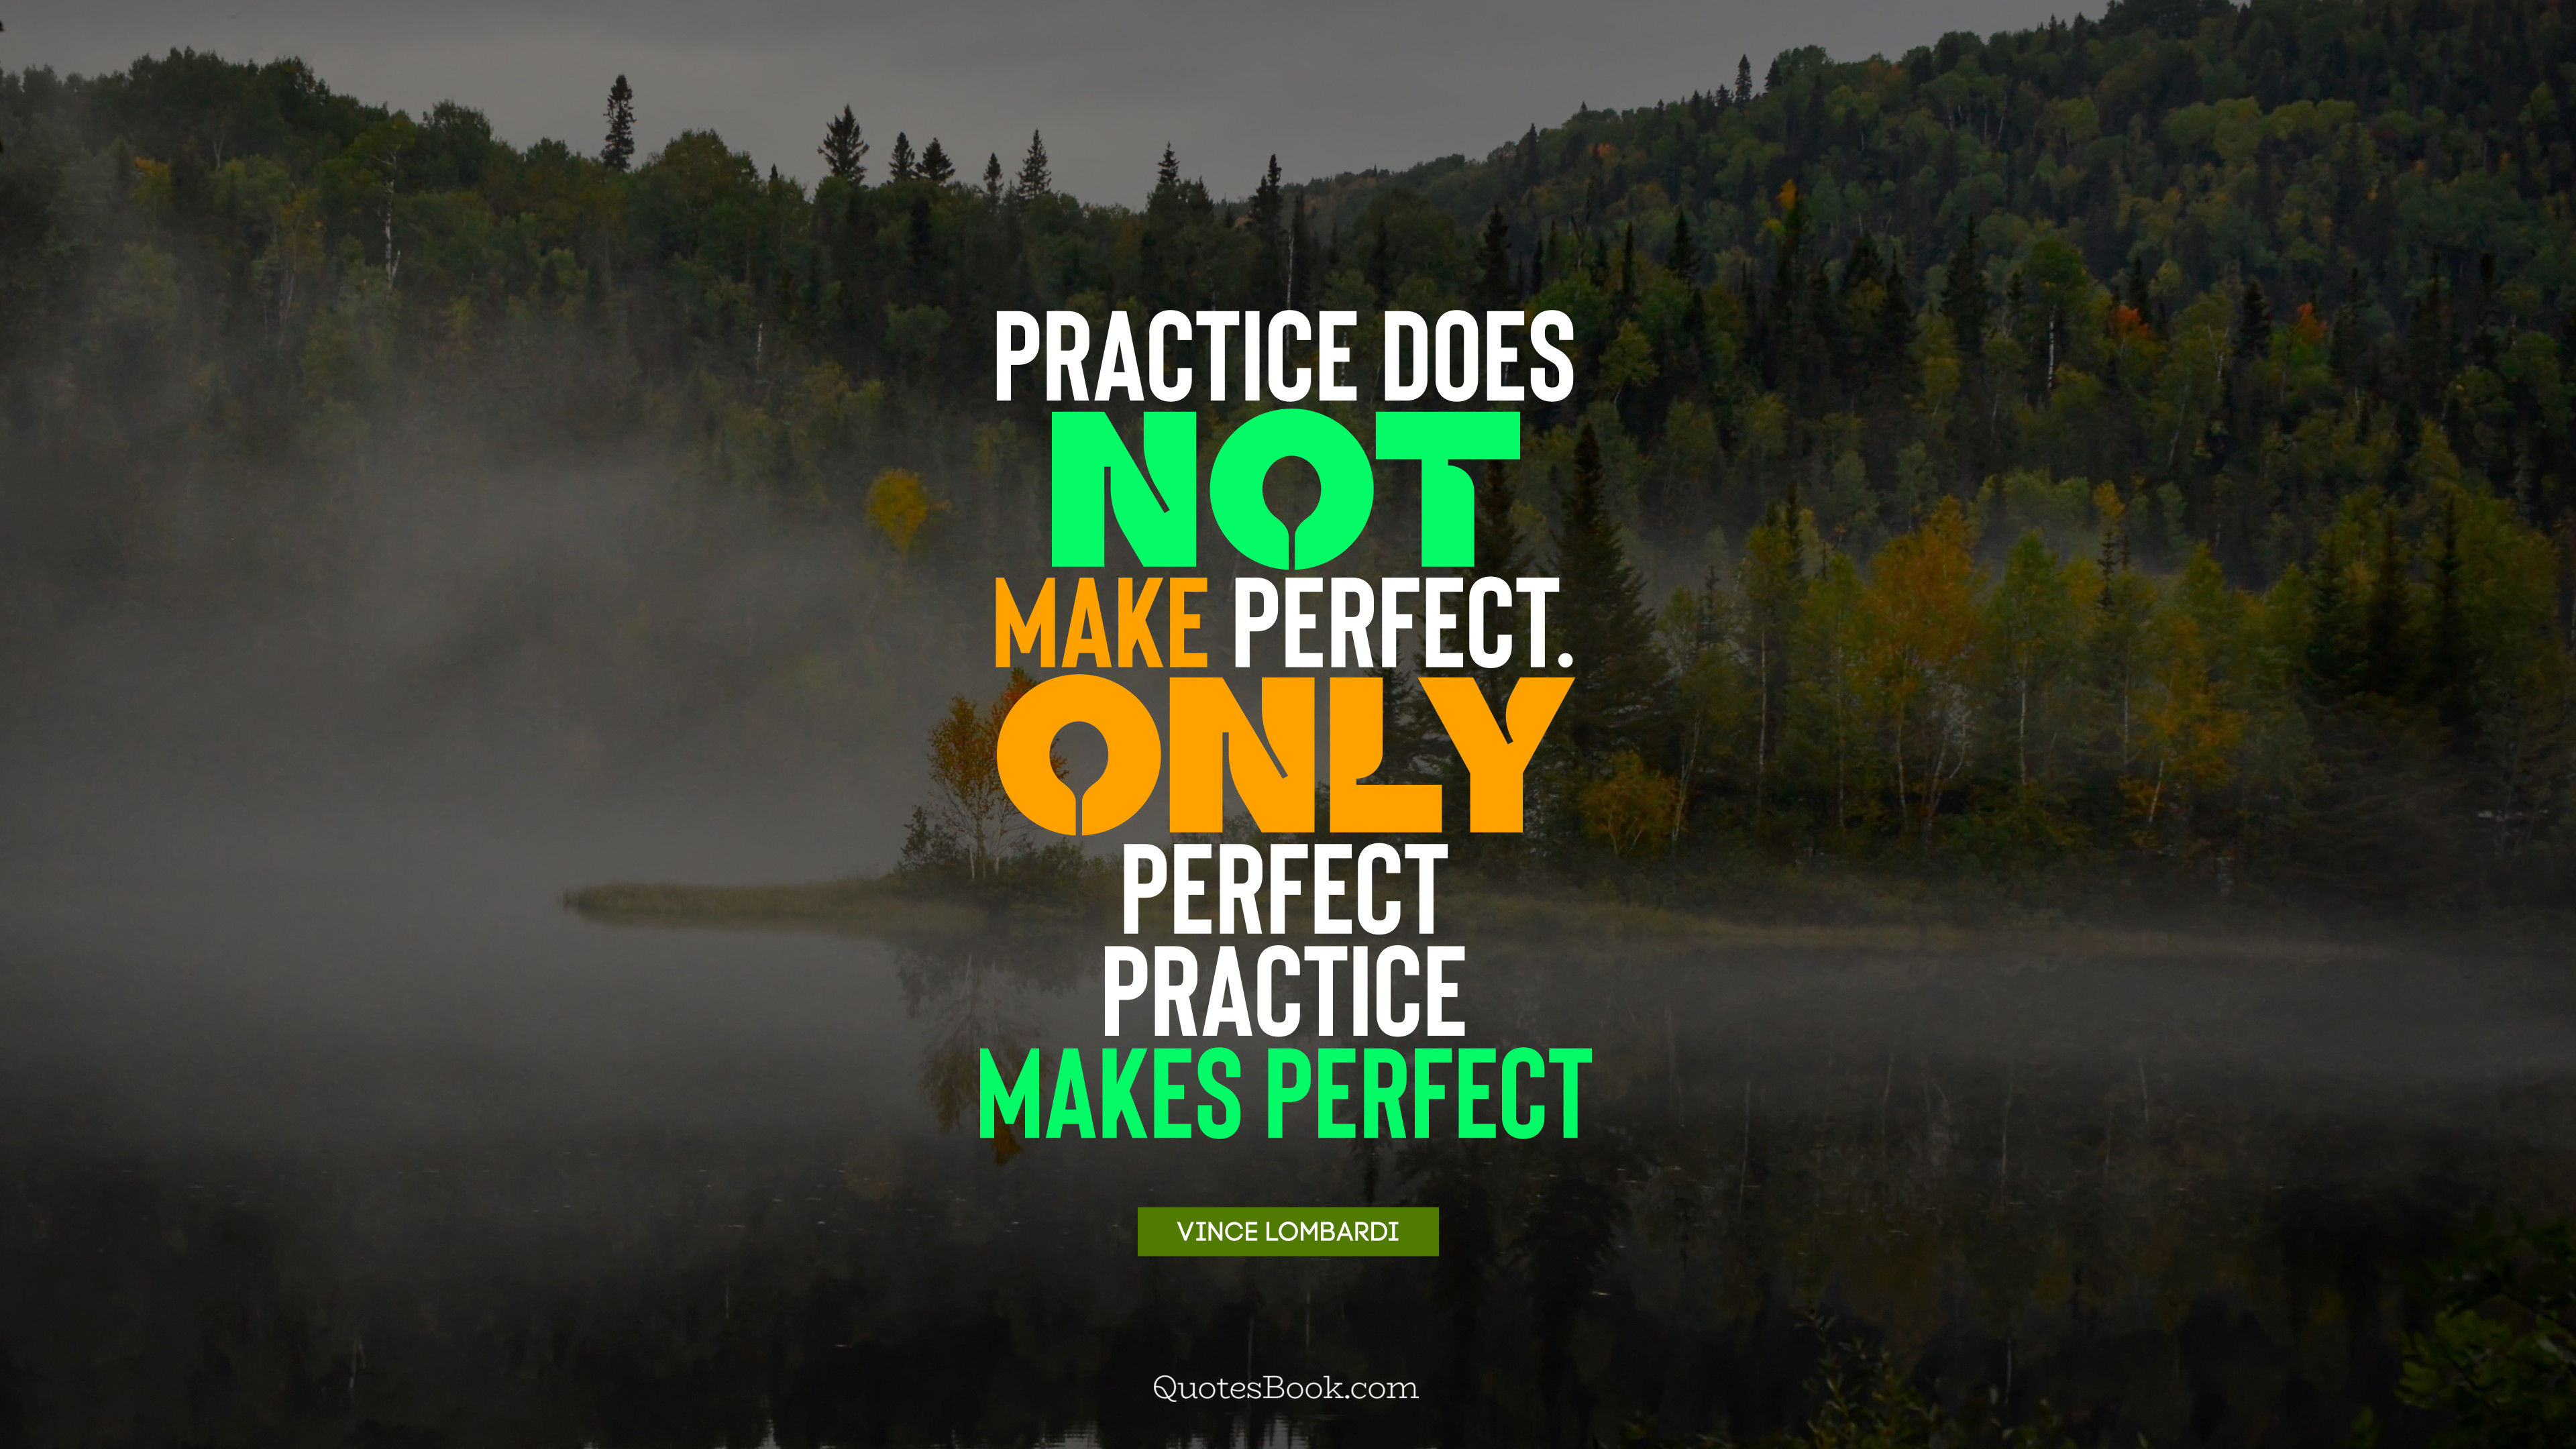 Practice does not make perfect. Only perfect practice